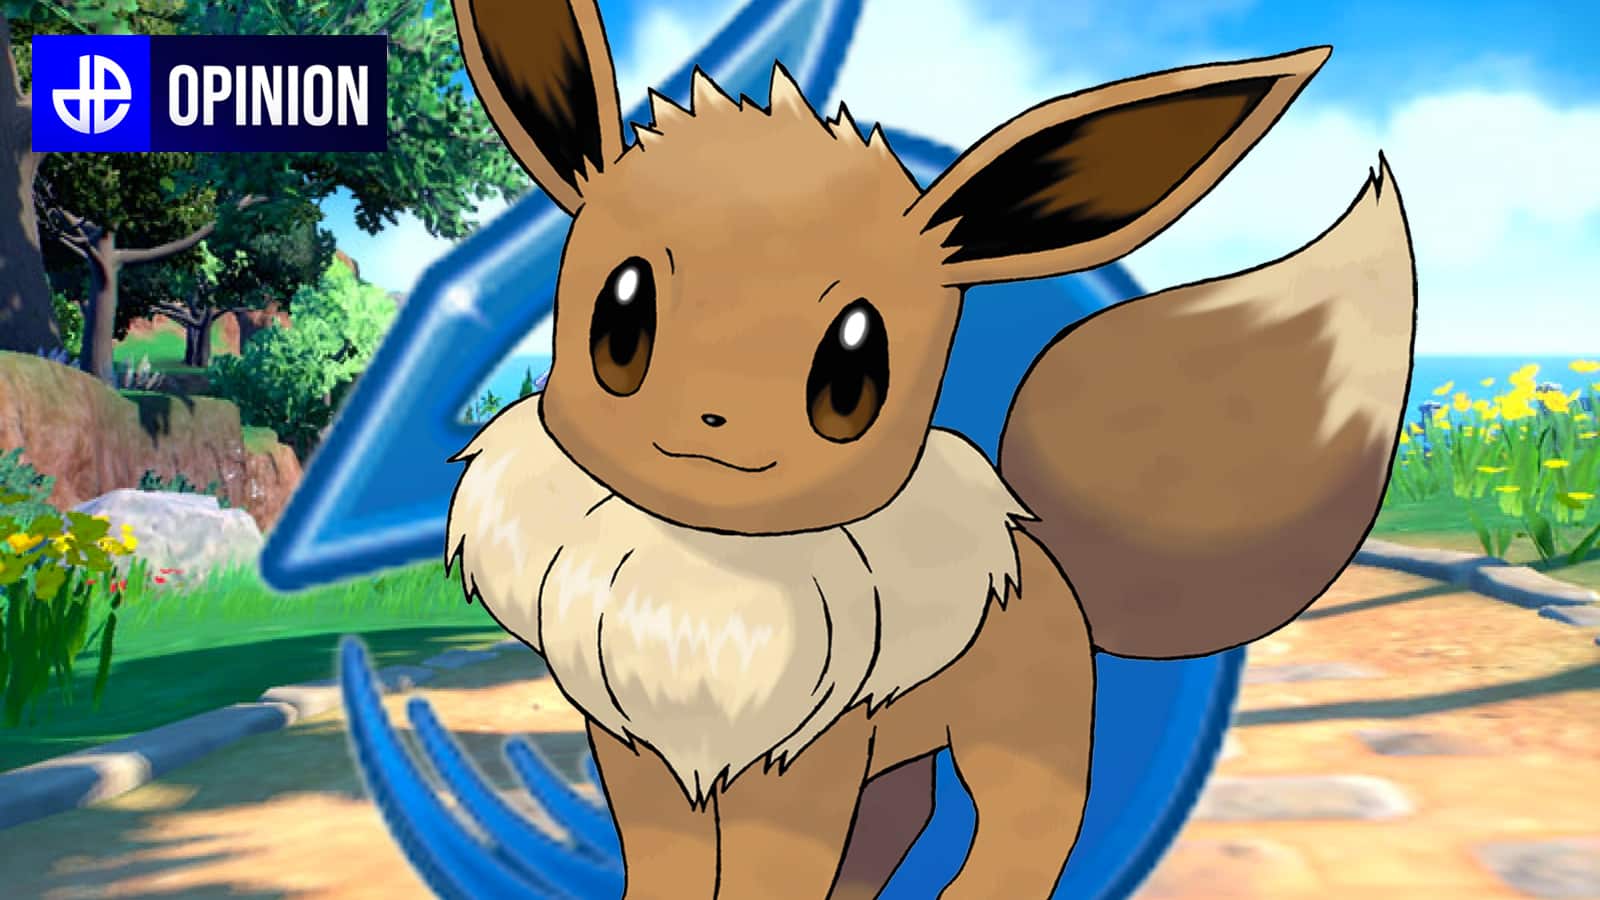 Eevee and Its Evolutions!  Pokémon Master Journeys: The Series